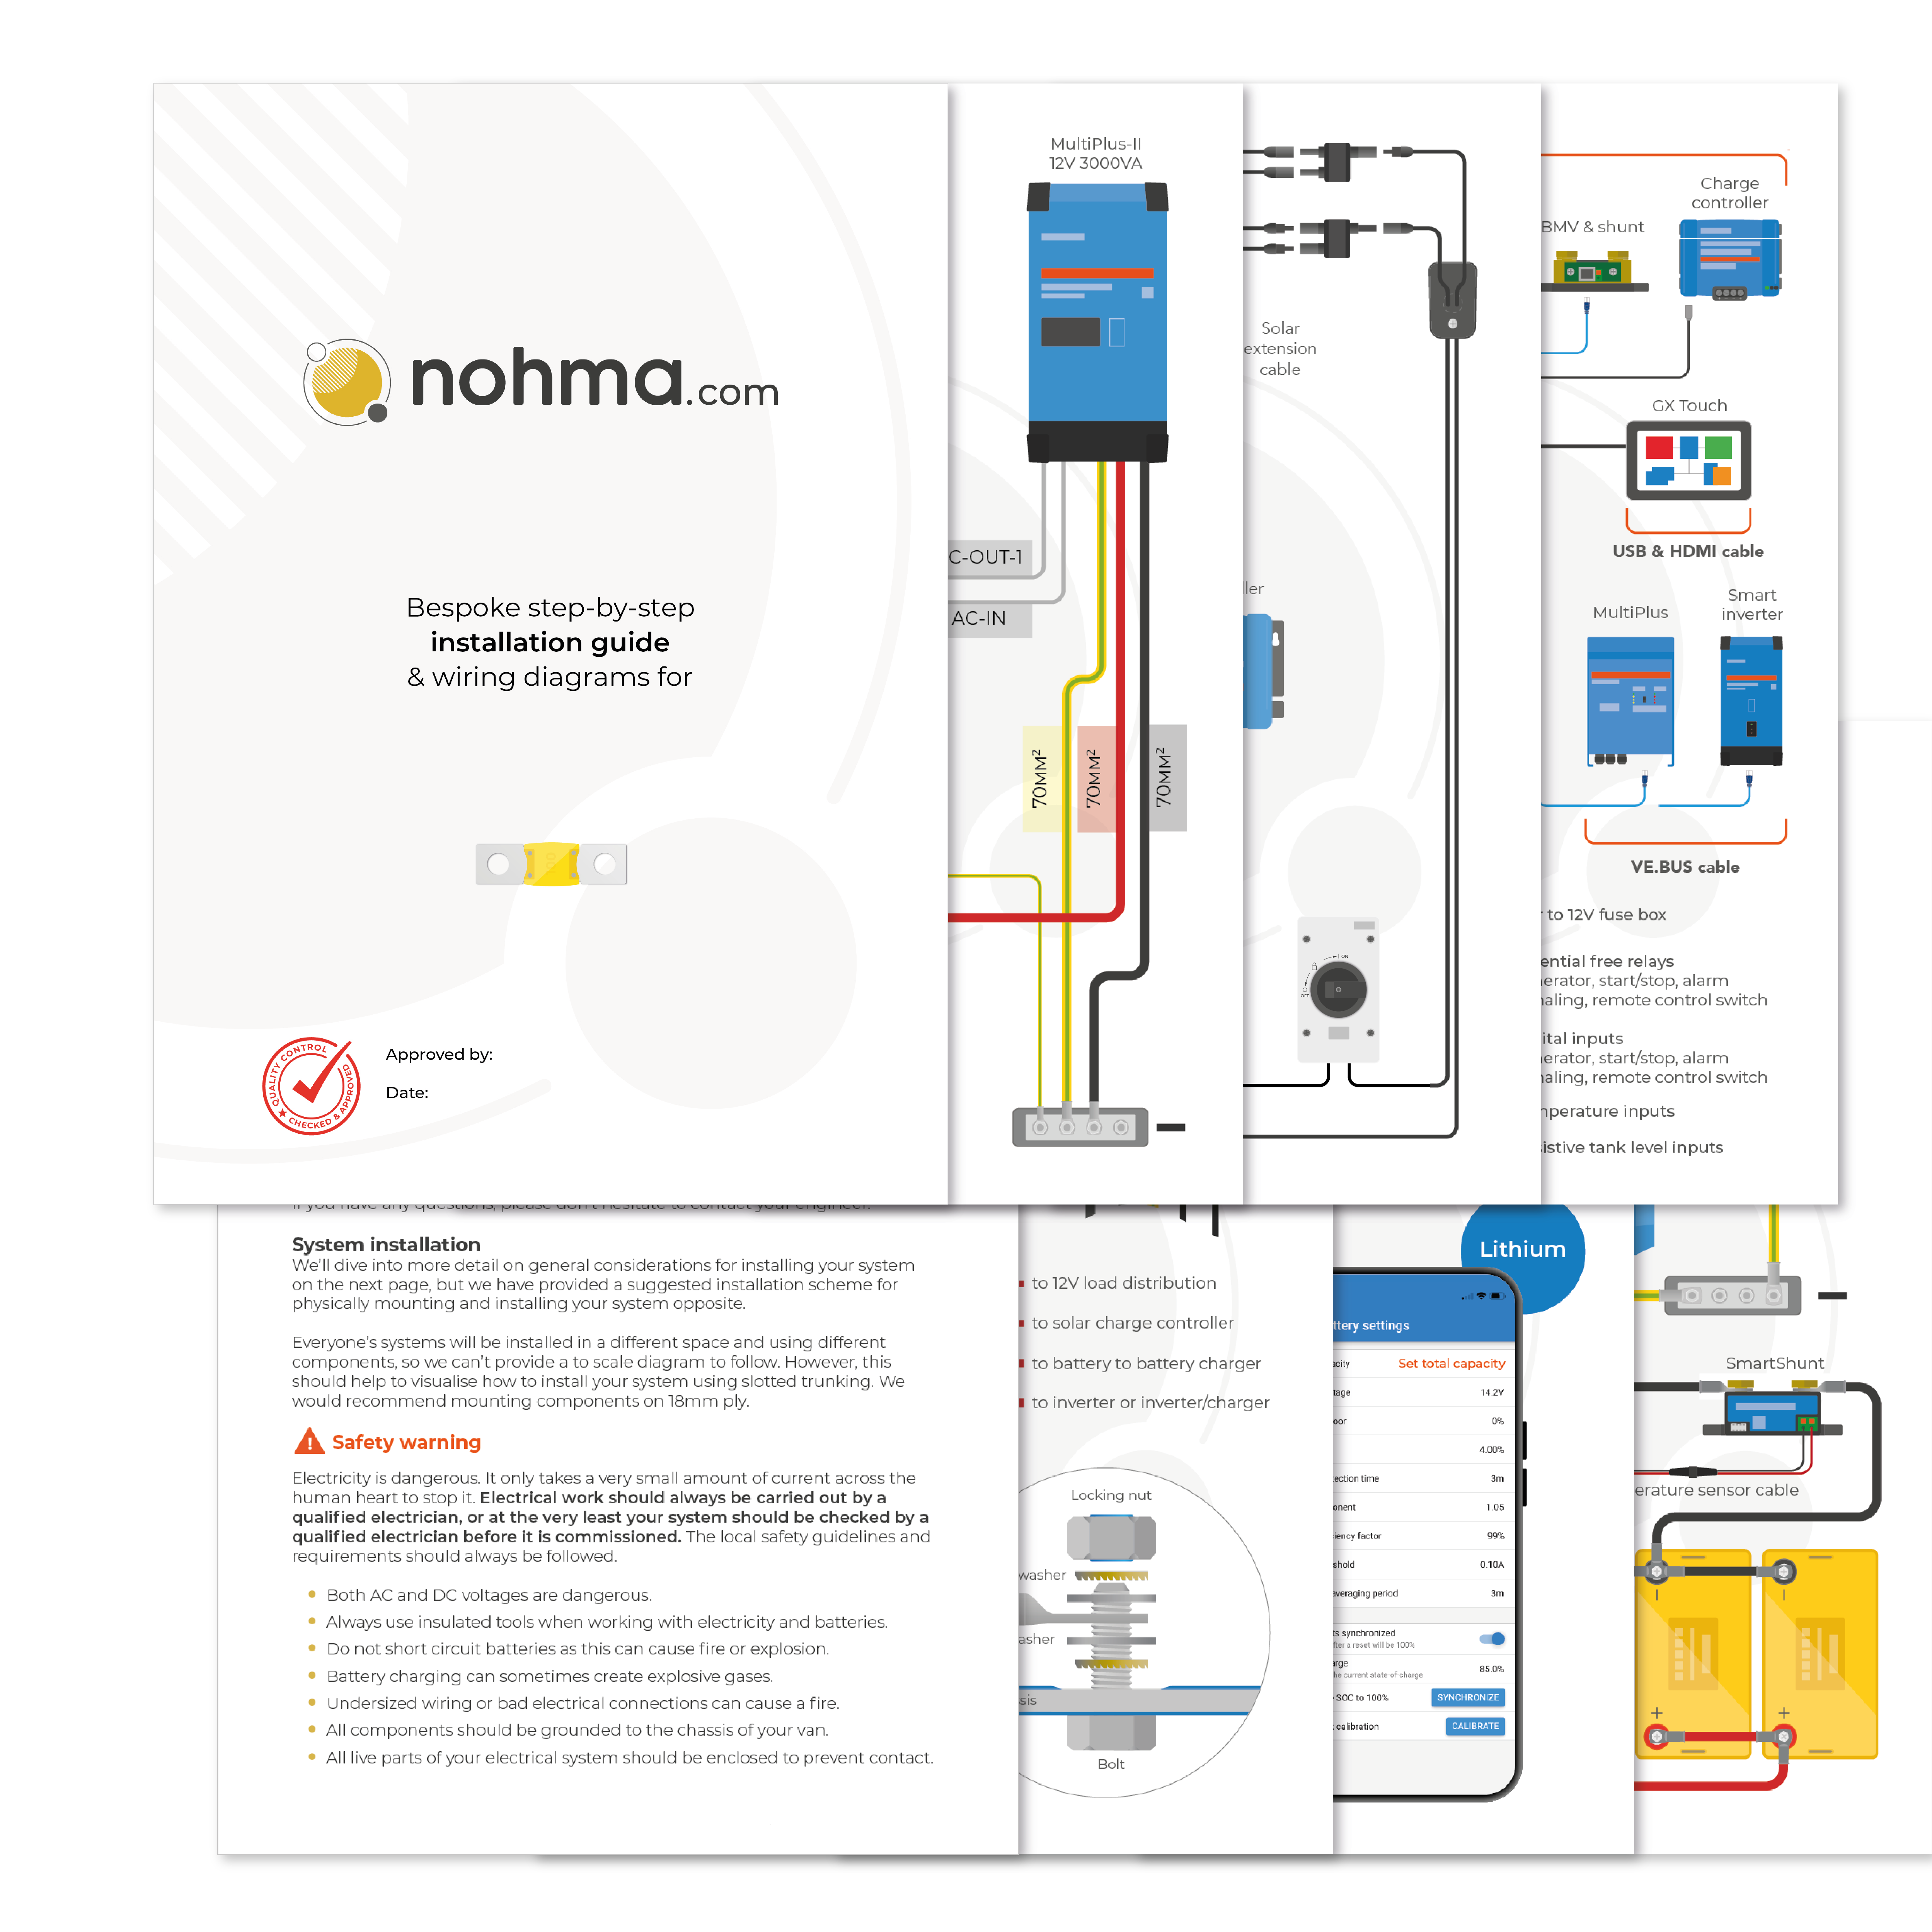 Nohma electrical system design install guide wiring diagram